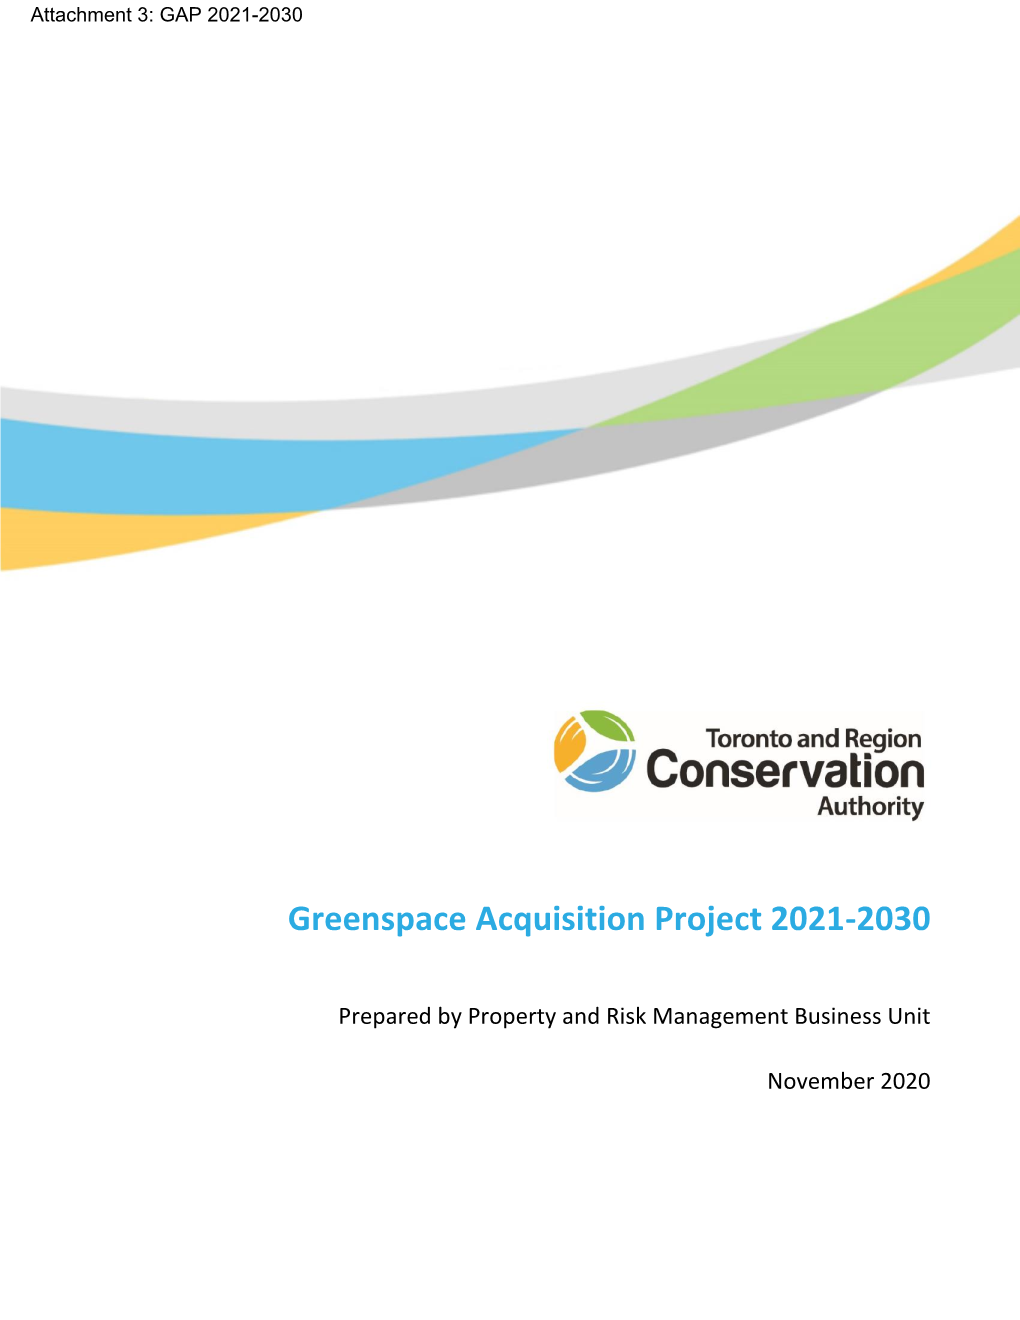 Greenspace Acquisition Project 2021-2030